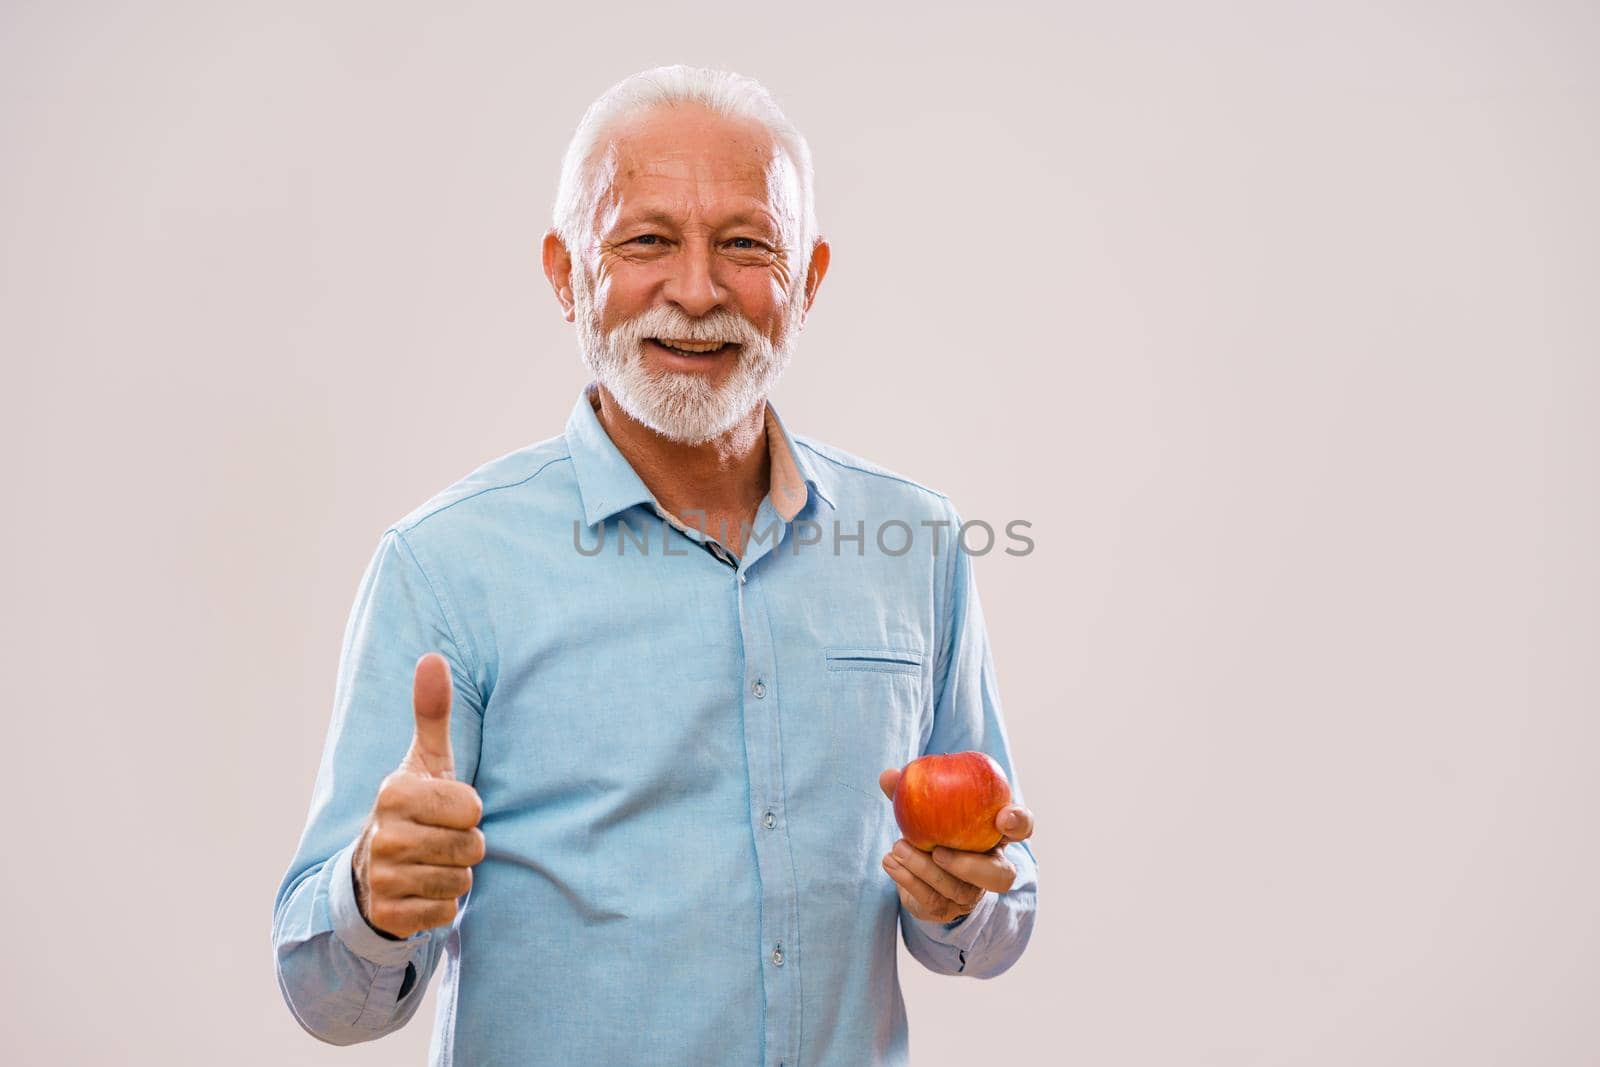 Portrait of cheerful senior man who is holding apple and smiling.